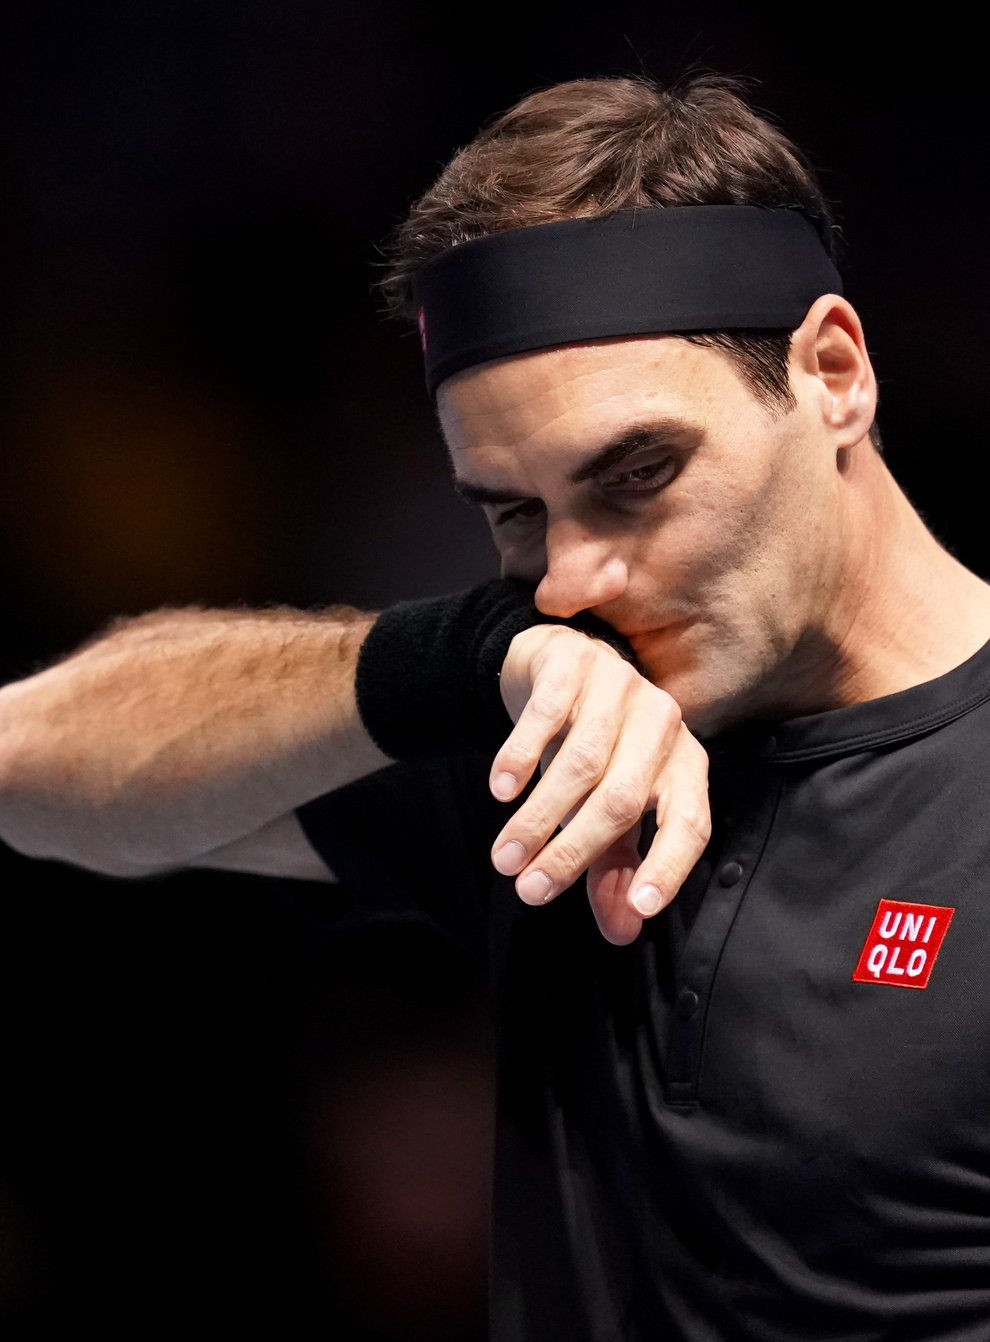 Roger Federer has announced he will miss the remainder of the 2020 season